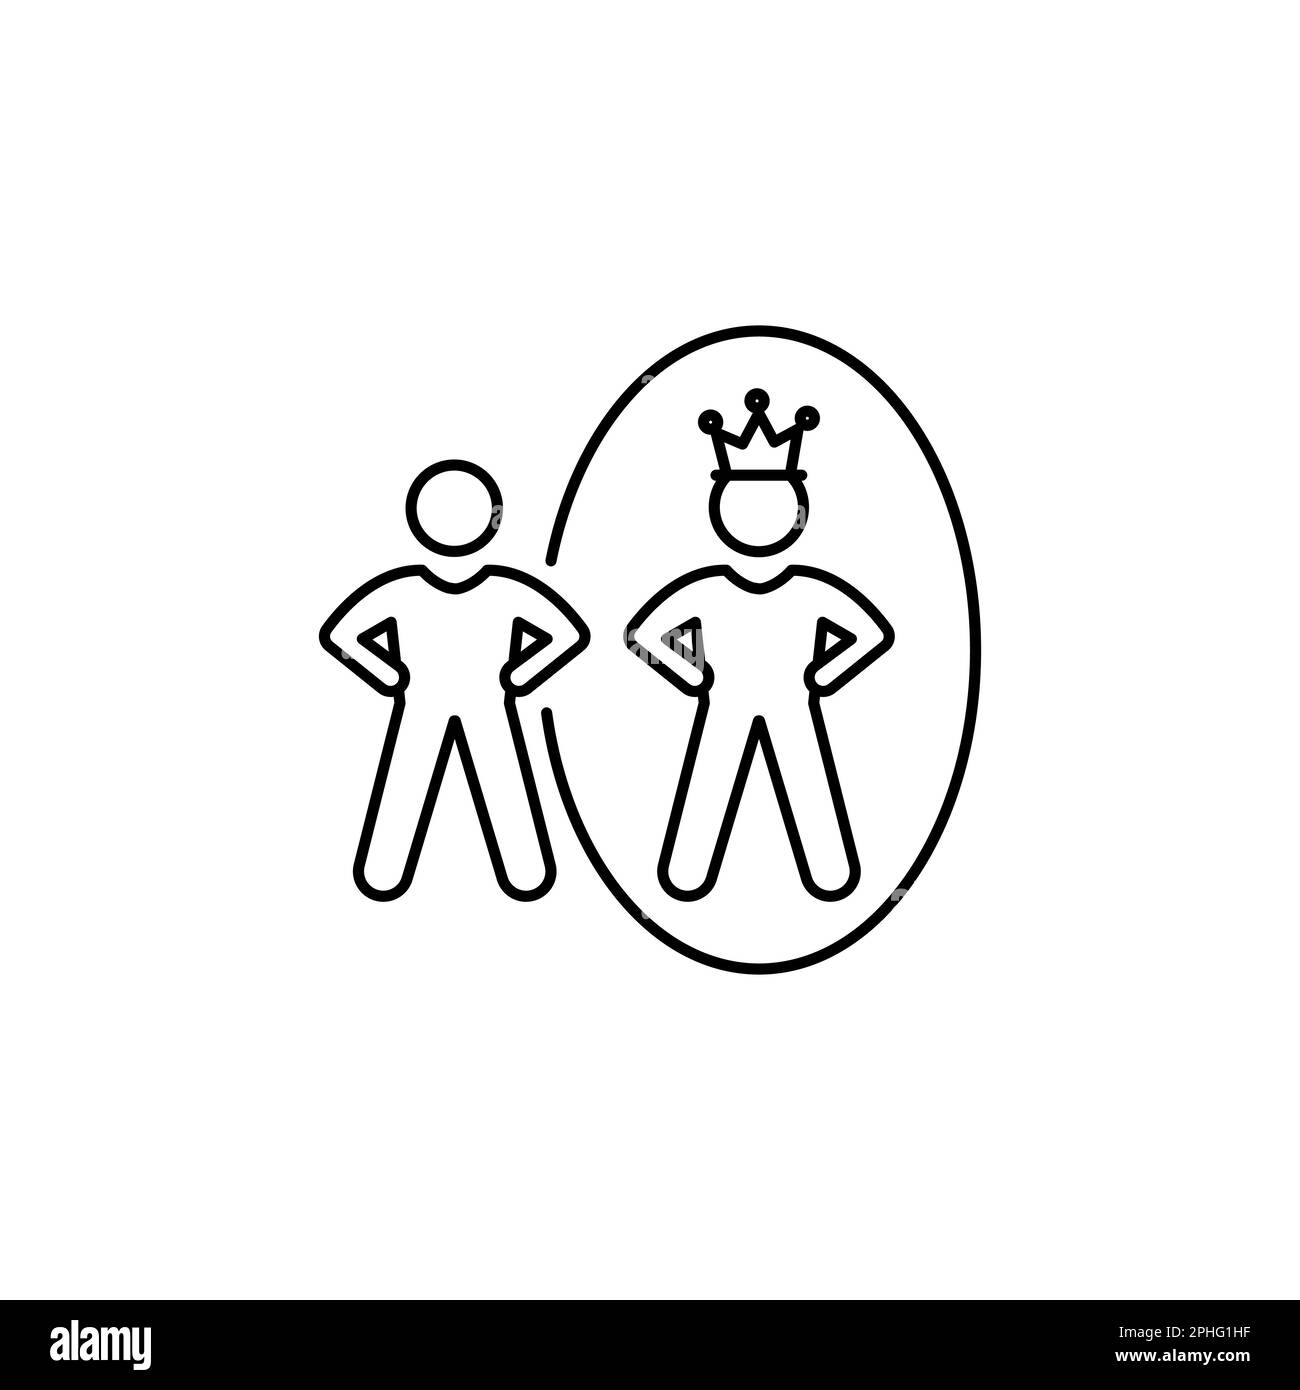 confidence clipart black and white